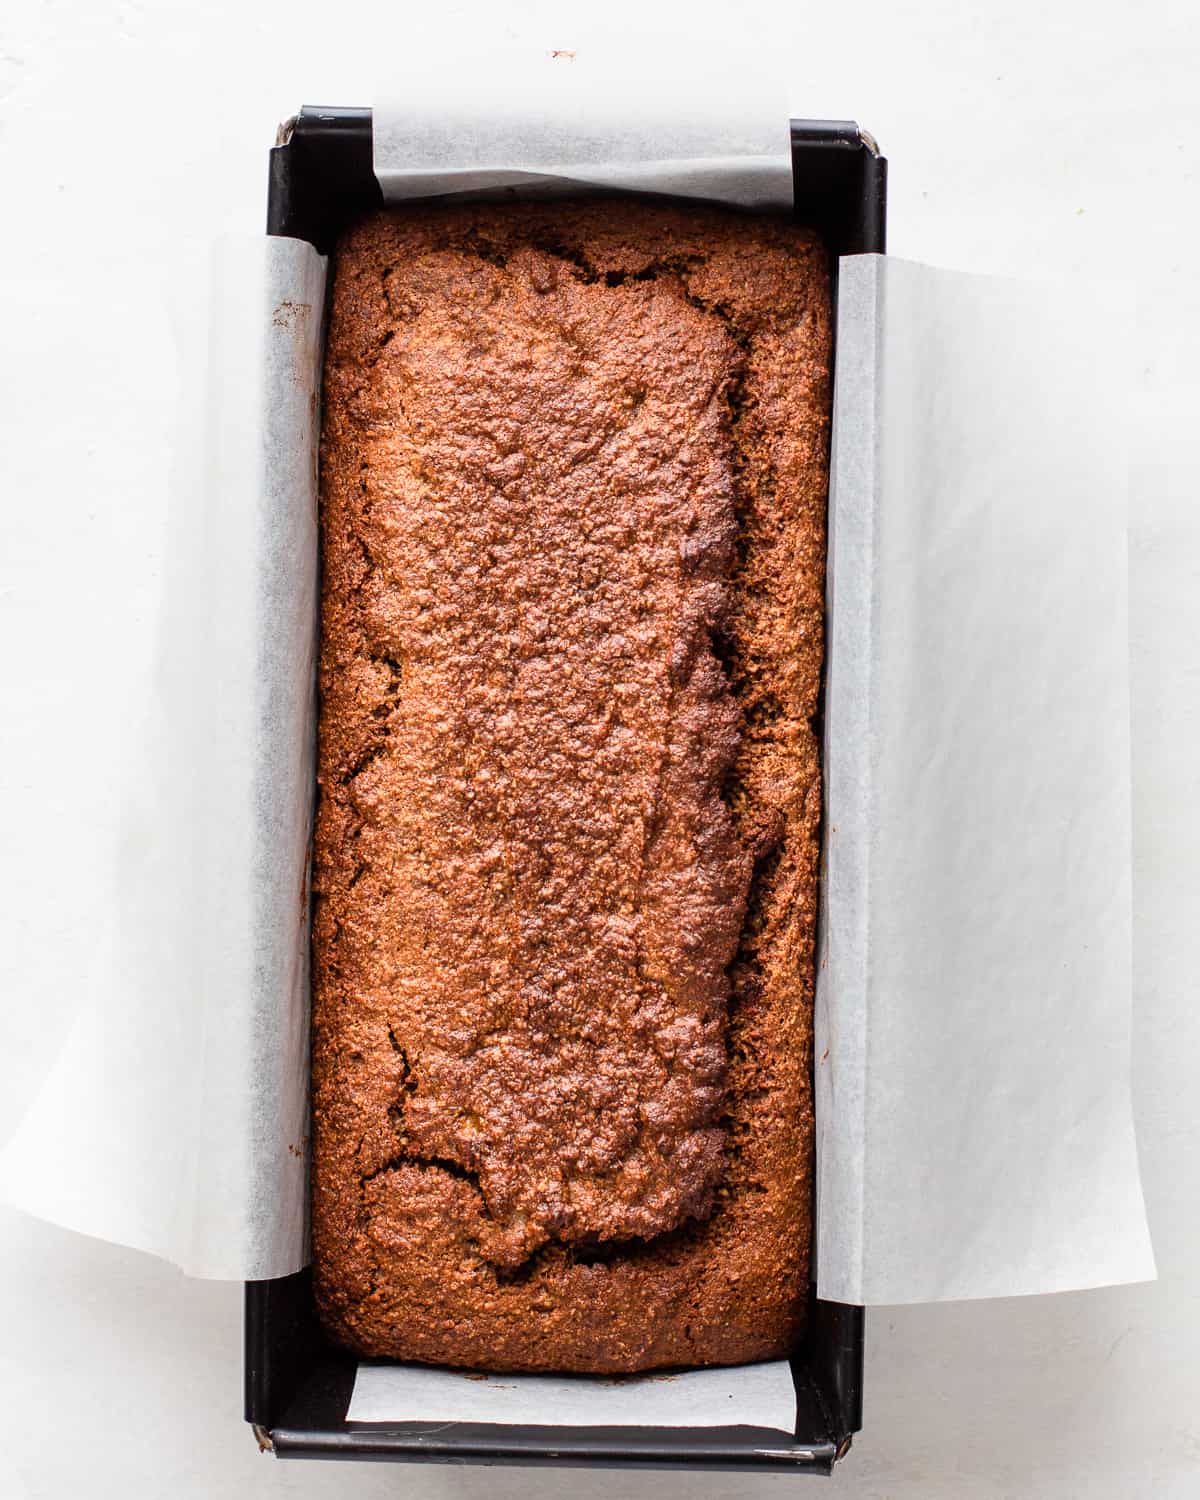 Baked banana bread with a golden brown crust in a black loaf pan.